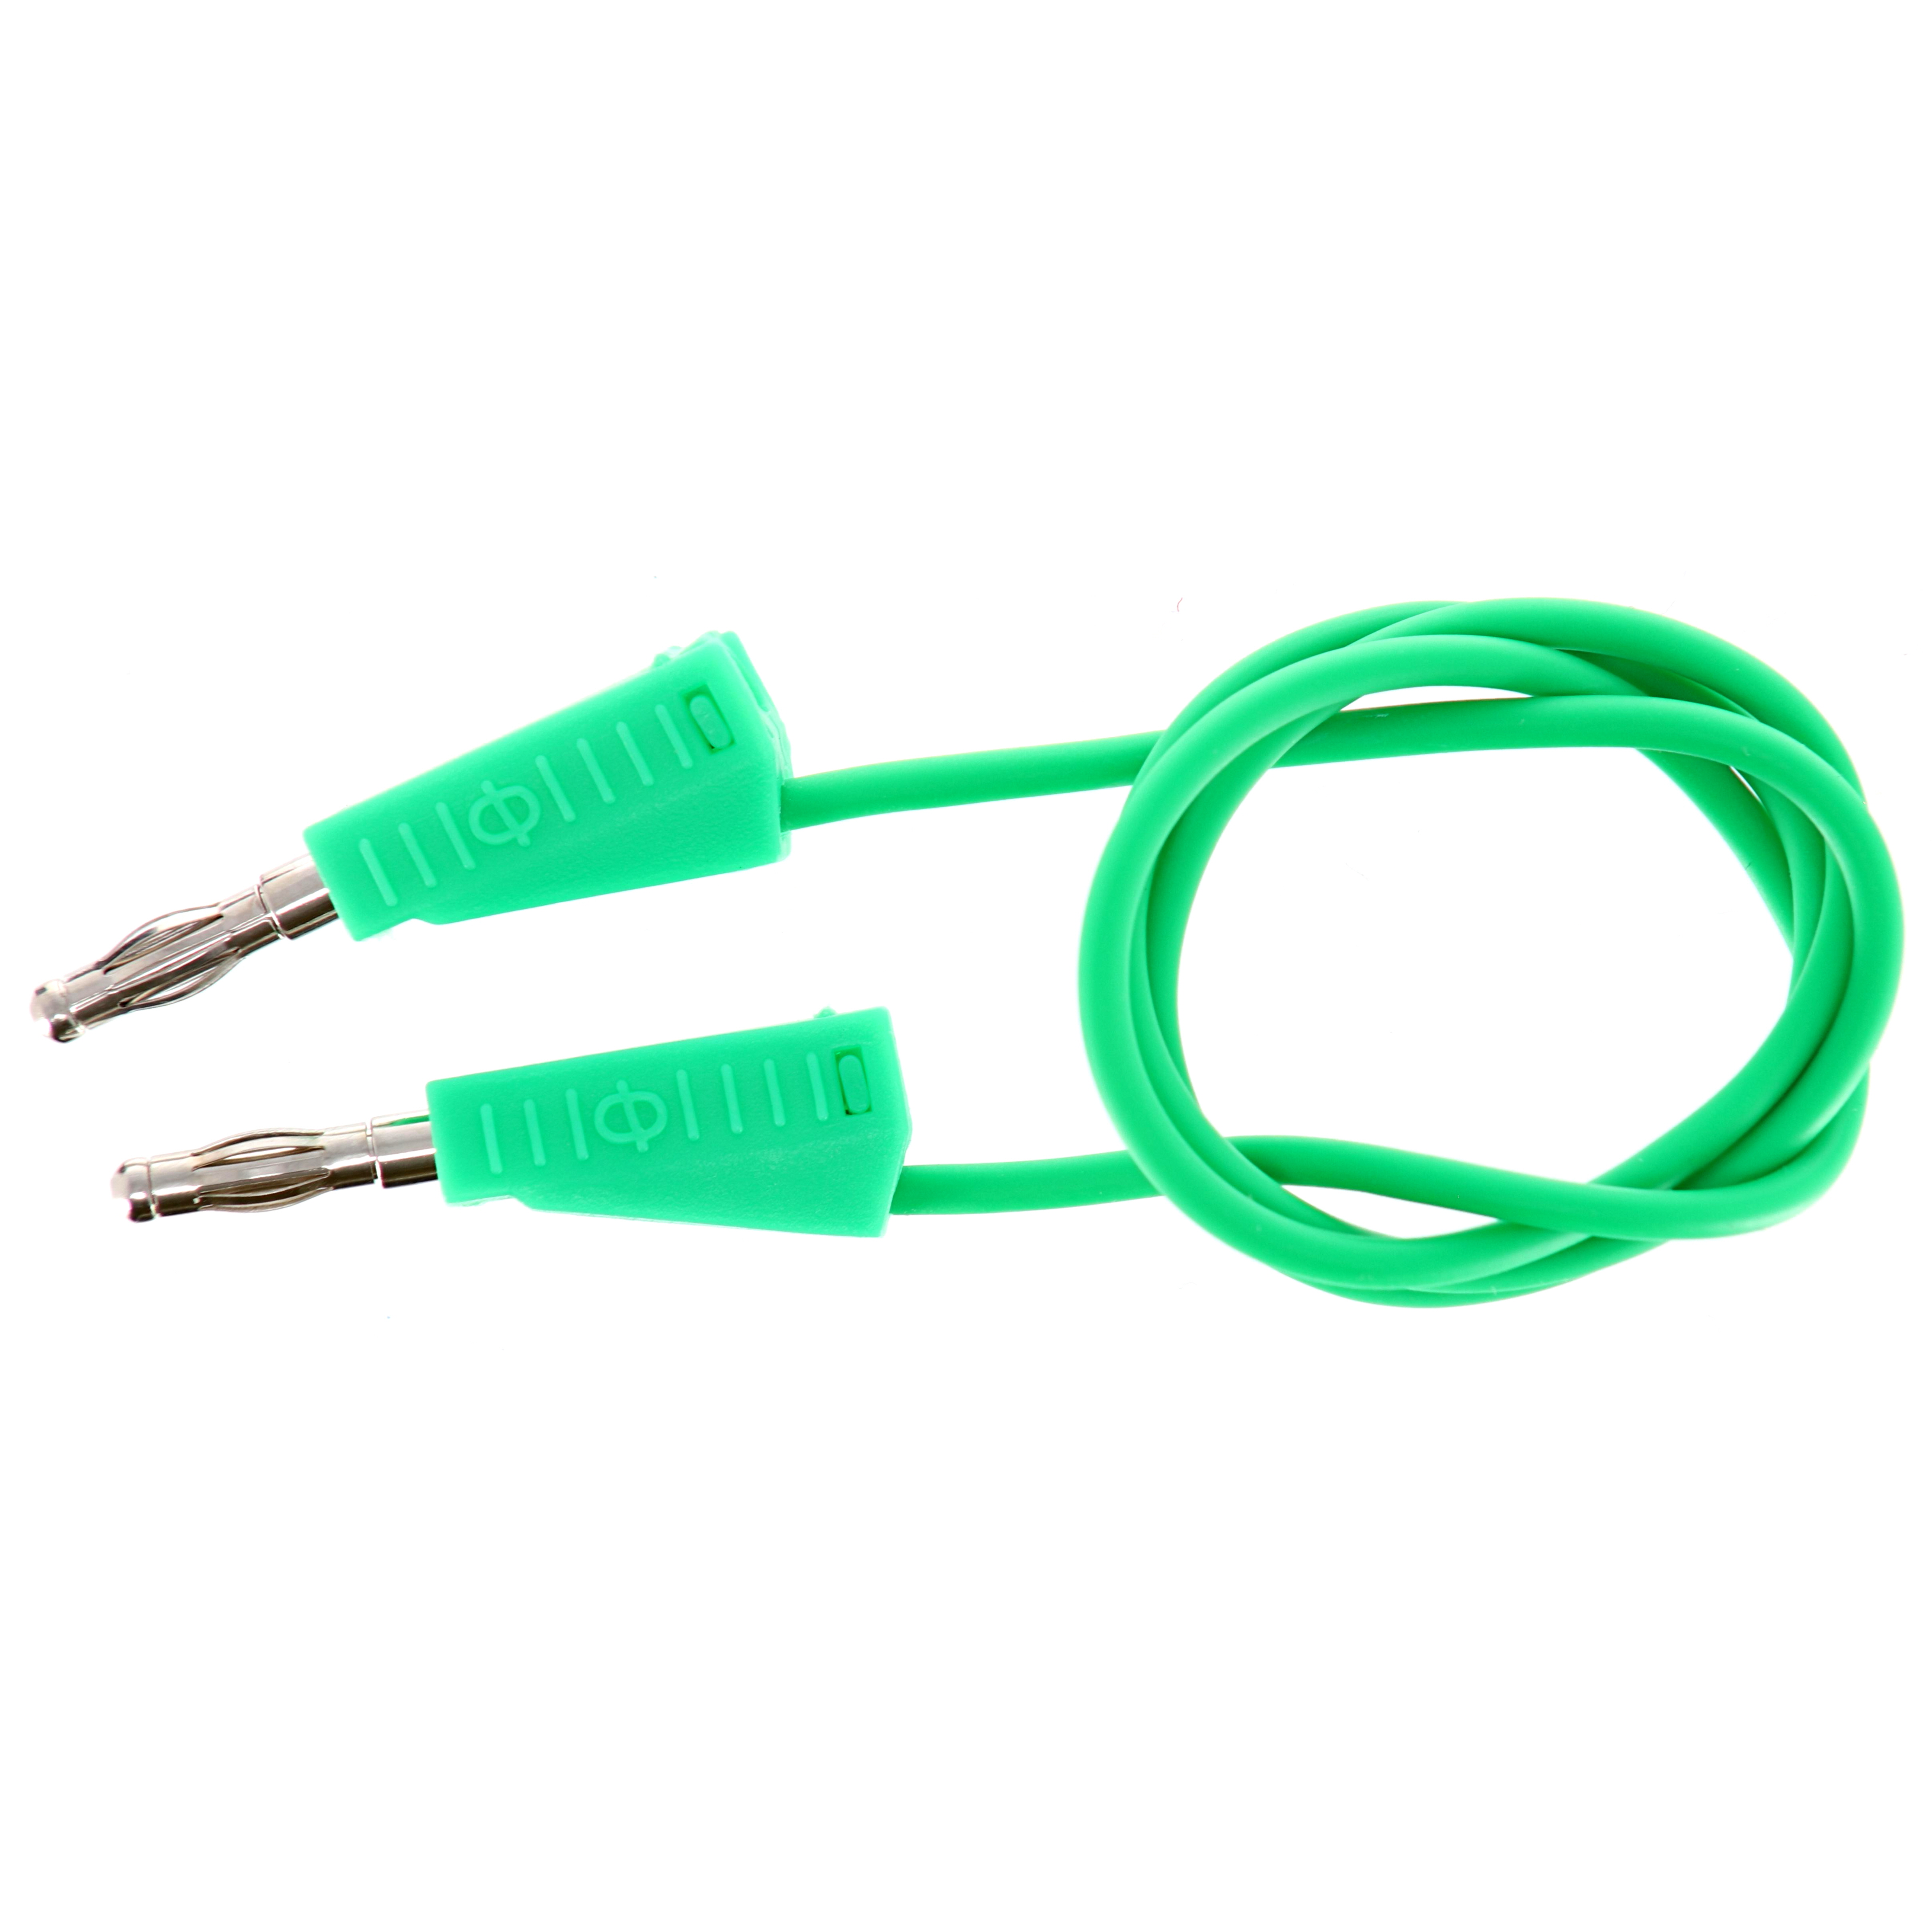 4mm Stackable Plug Lead 500mm - Green